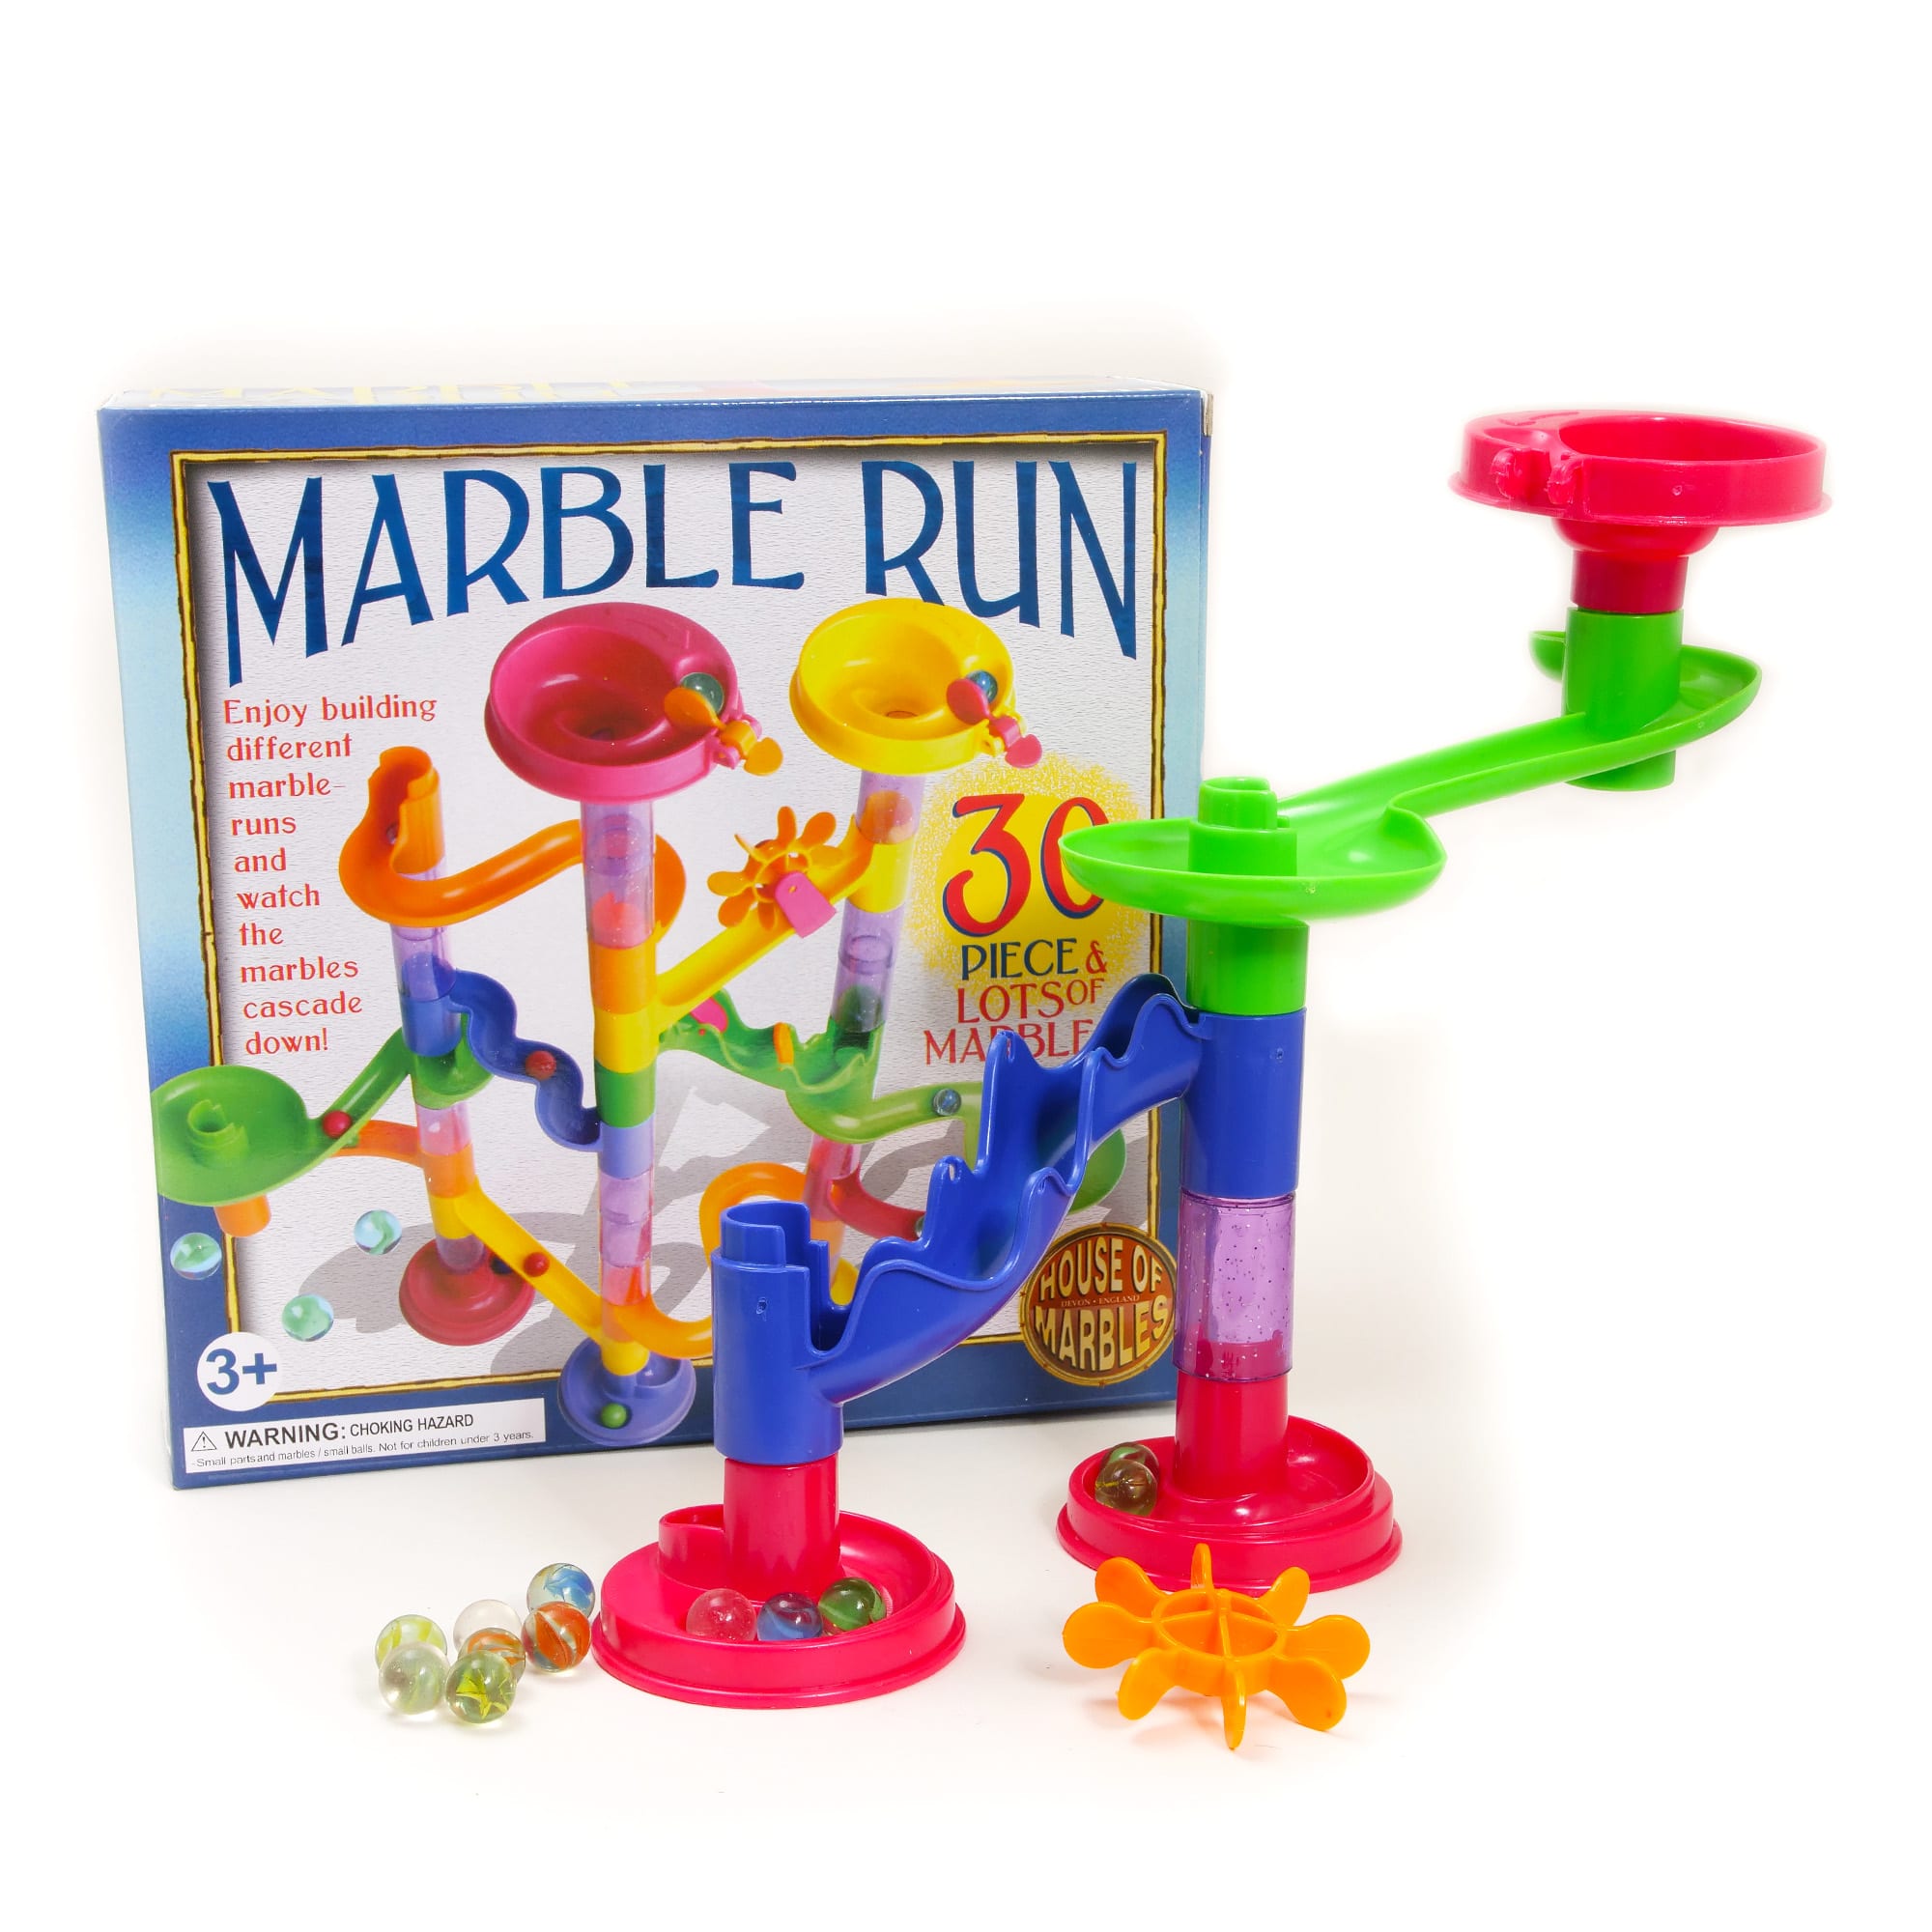 Marble Run 24 Piece Kit an Educational & Entertaining Toy House of Marbles for sale online 